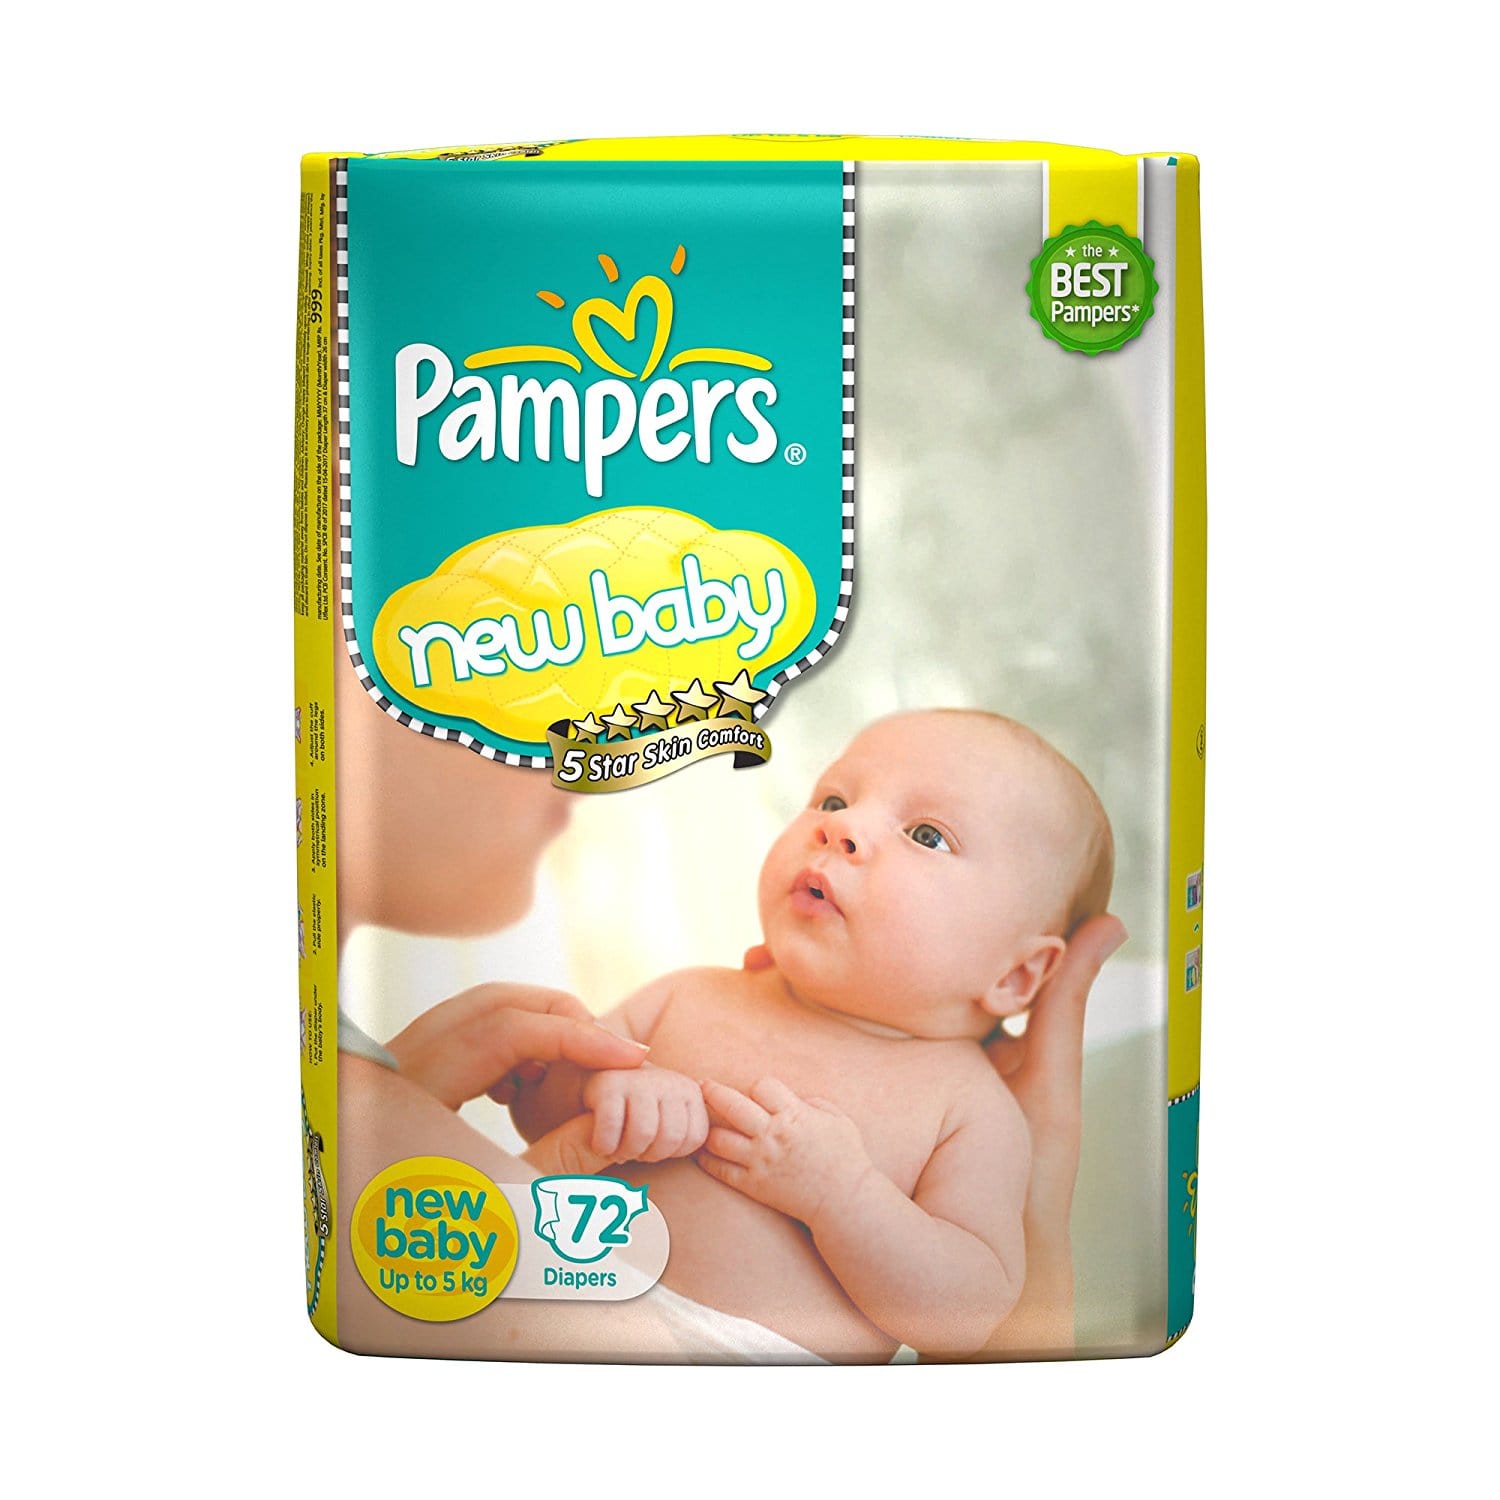 Pampers New born Baby Diaper (72 Count)